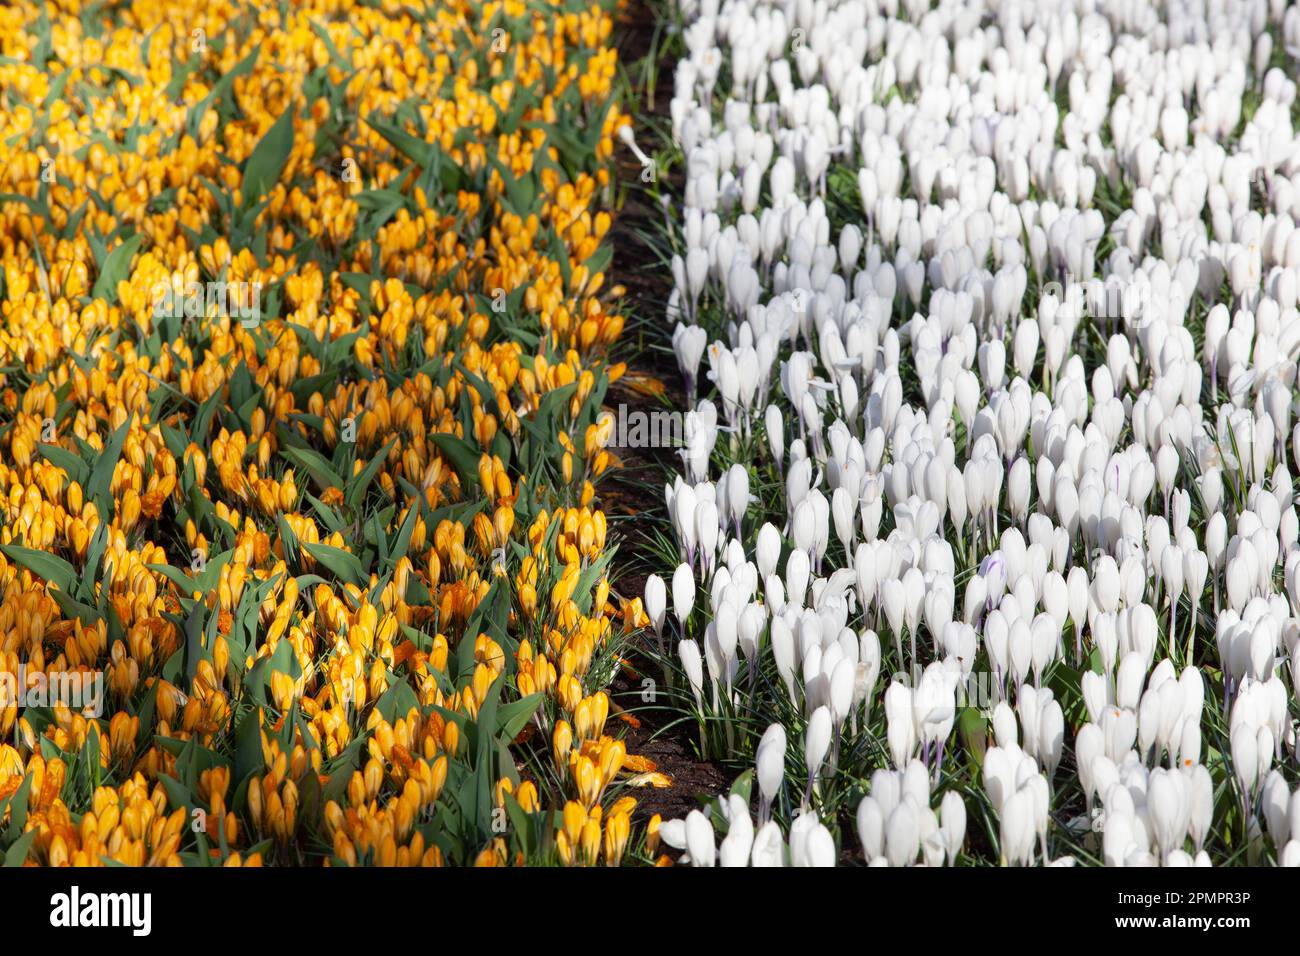 Amsterdam, The Netherlands, 23 March 2023: The annual opening of the Keukenhof gardens has begun, with early spring bulbs including these yellow and w Stock Photo